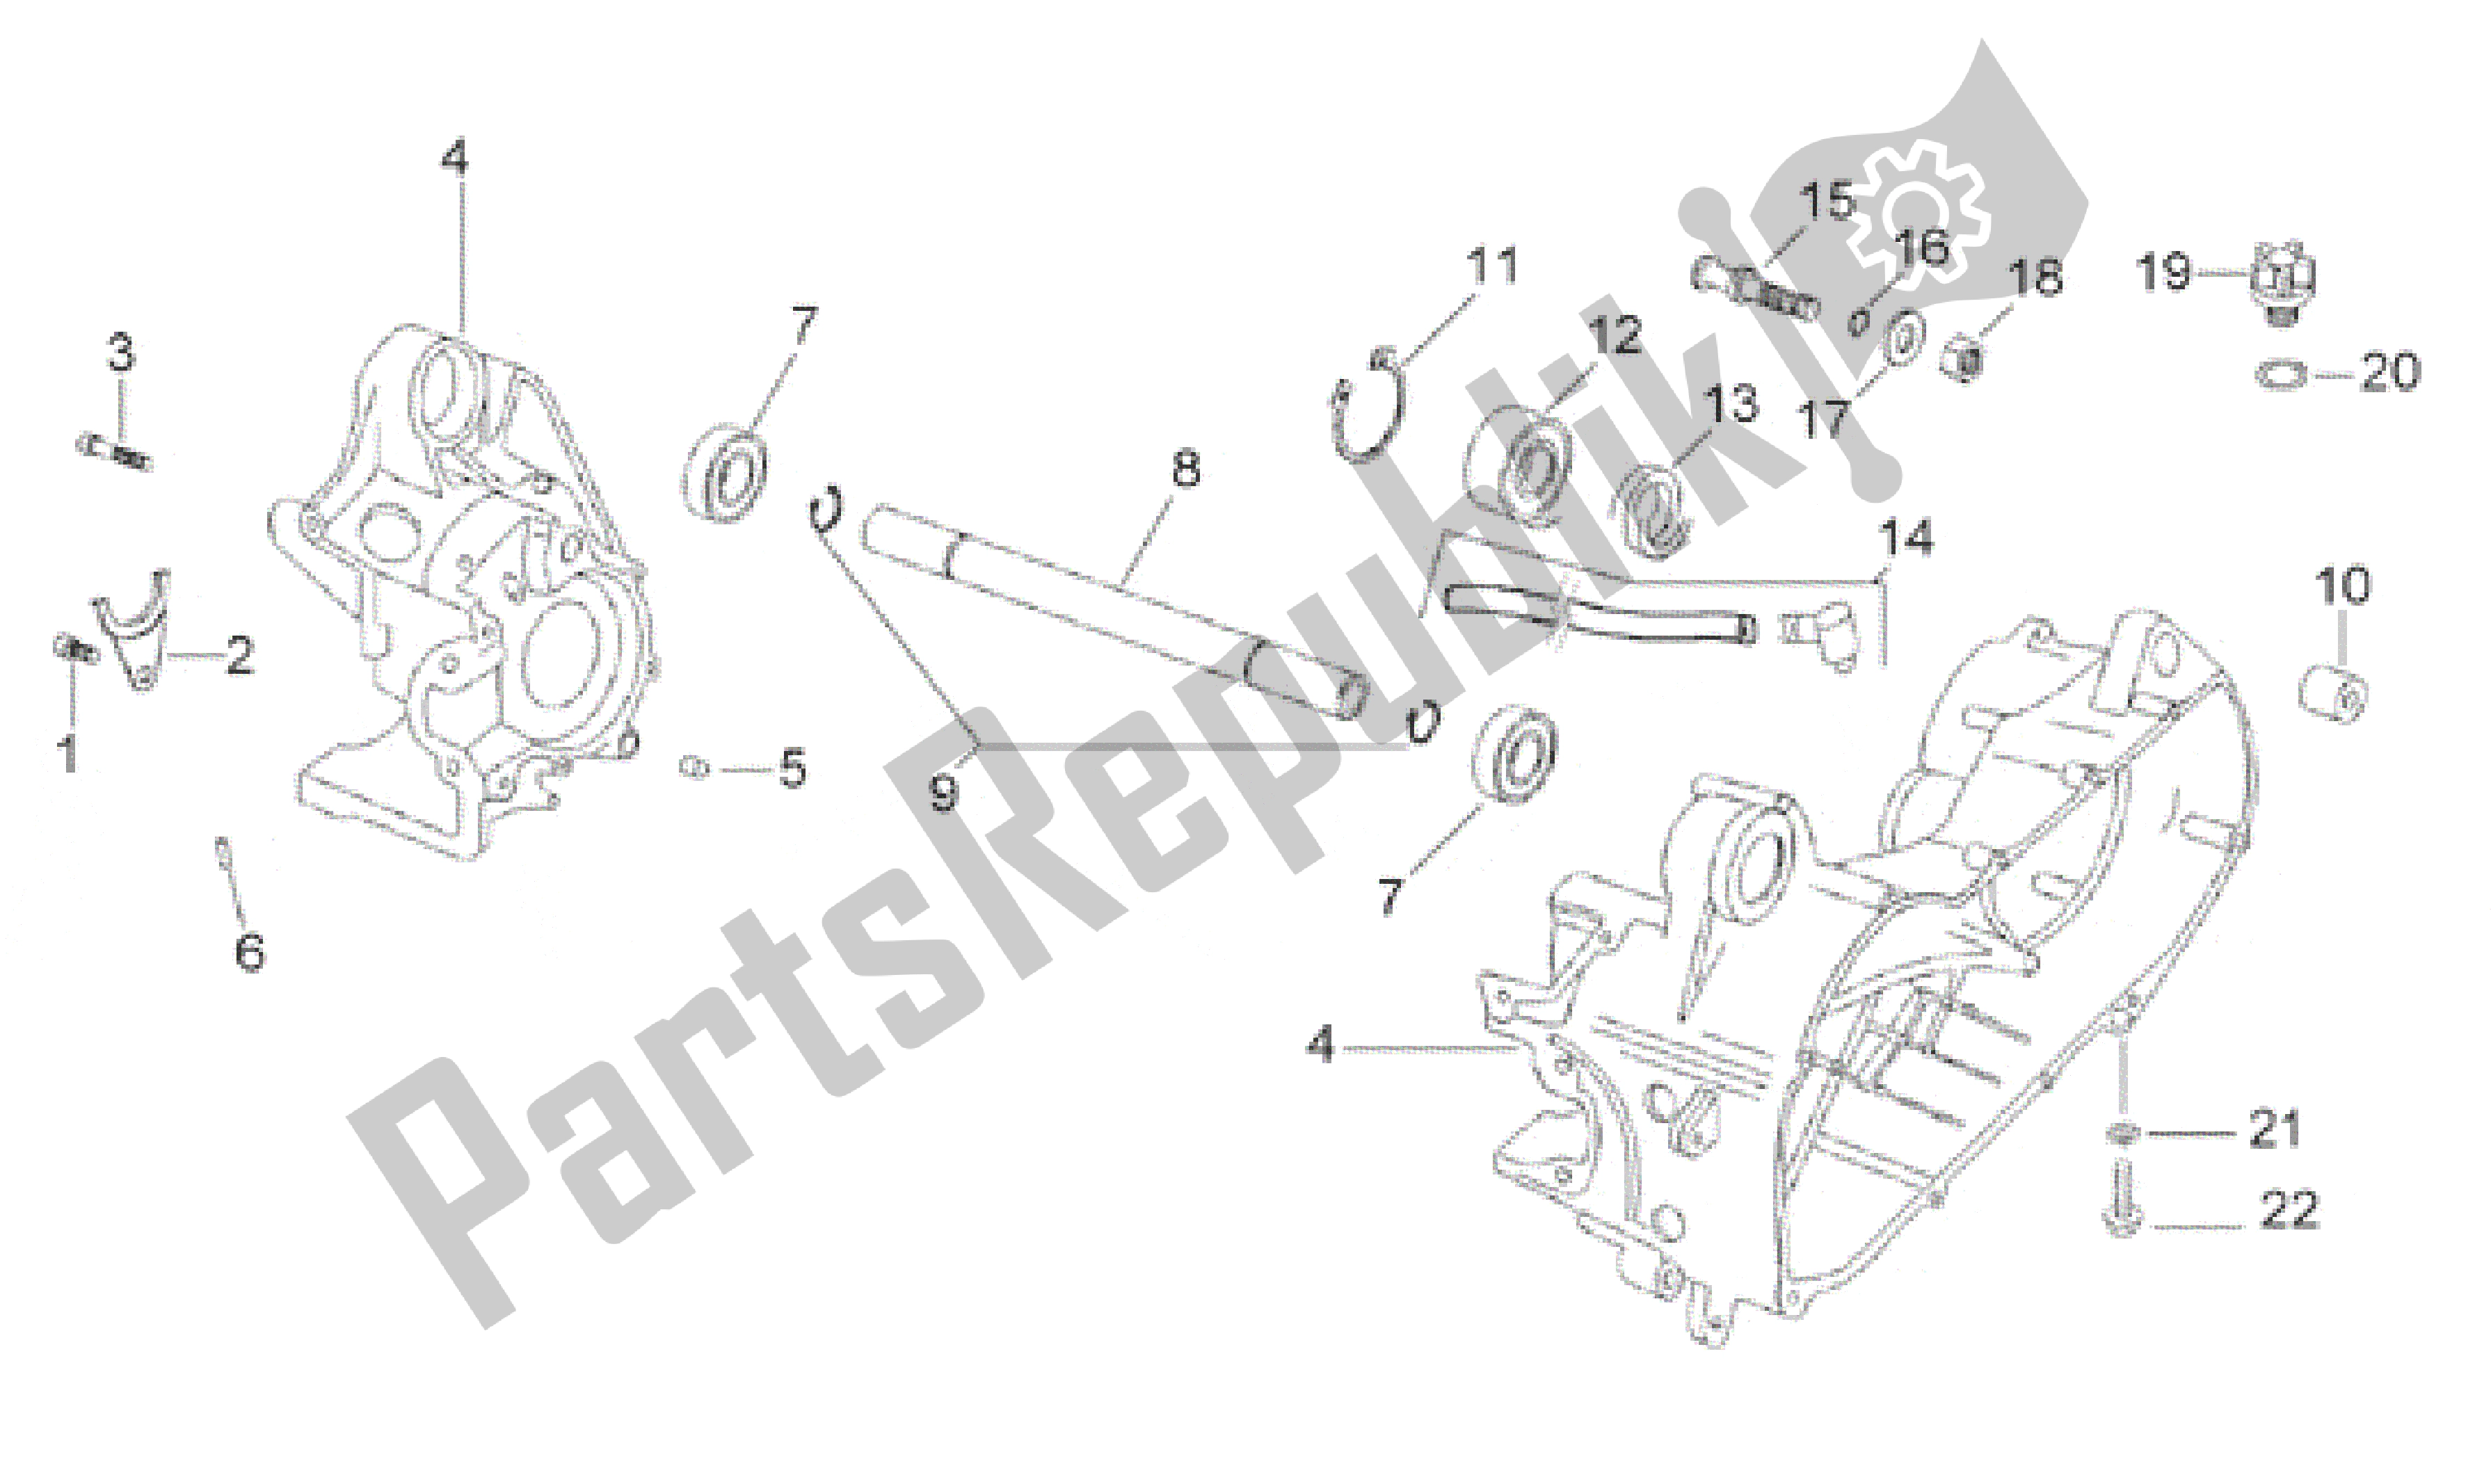 All parts for the Central Crank-case Set of the Aprilia Scarabeo 50 1999